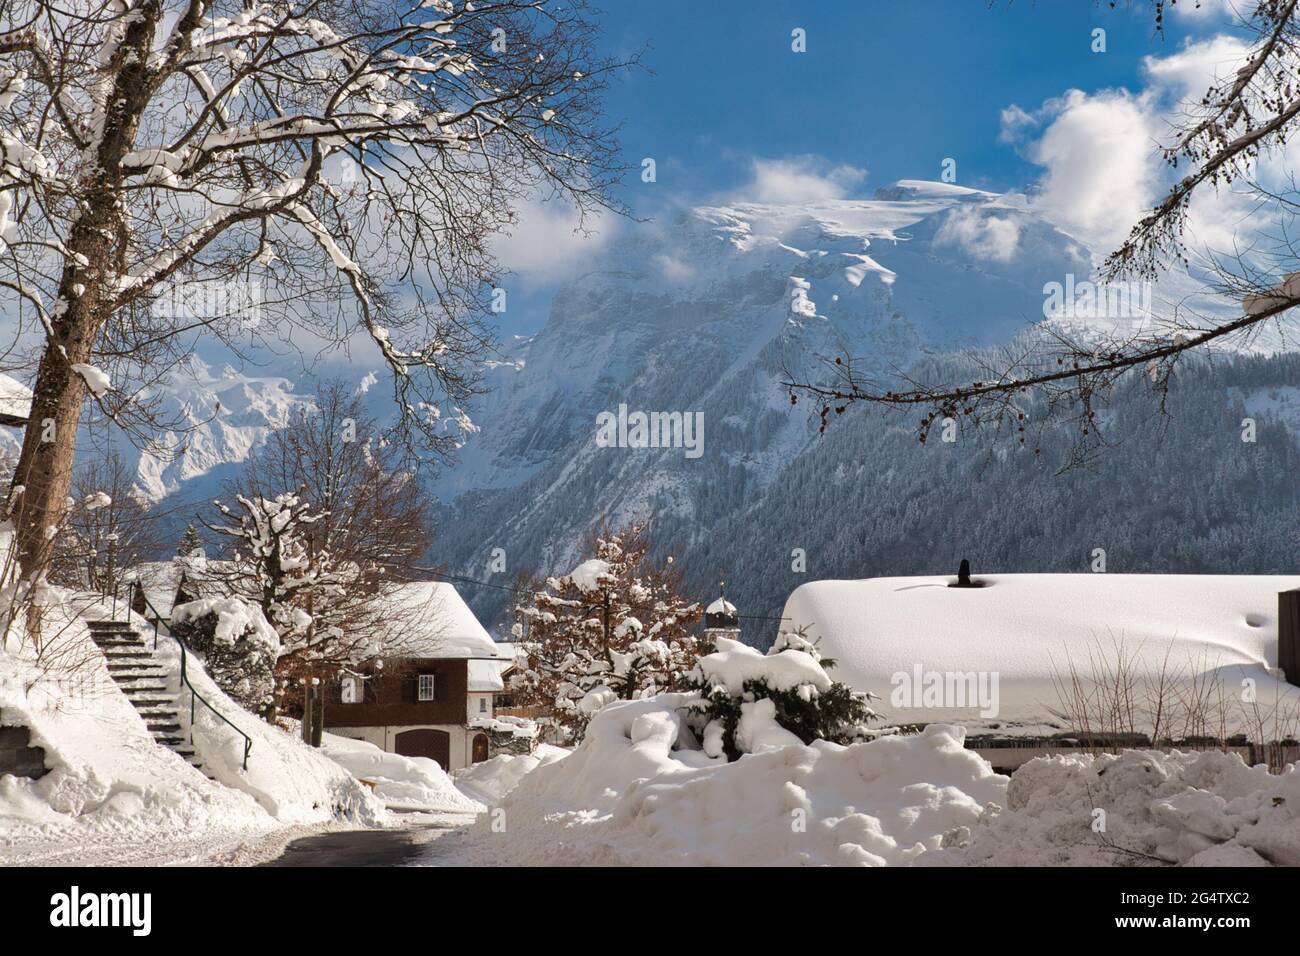 A winter scene of houses, chalets and rooftops covered in a thick layer of snow, also trees in Engelberg, Obwalden canton, central Switzerland Stock Photo